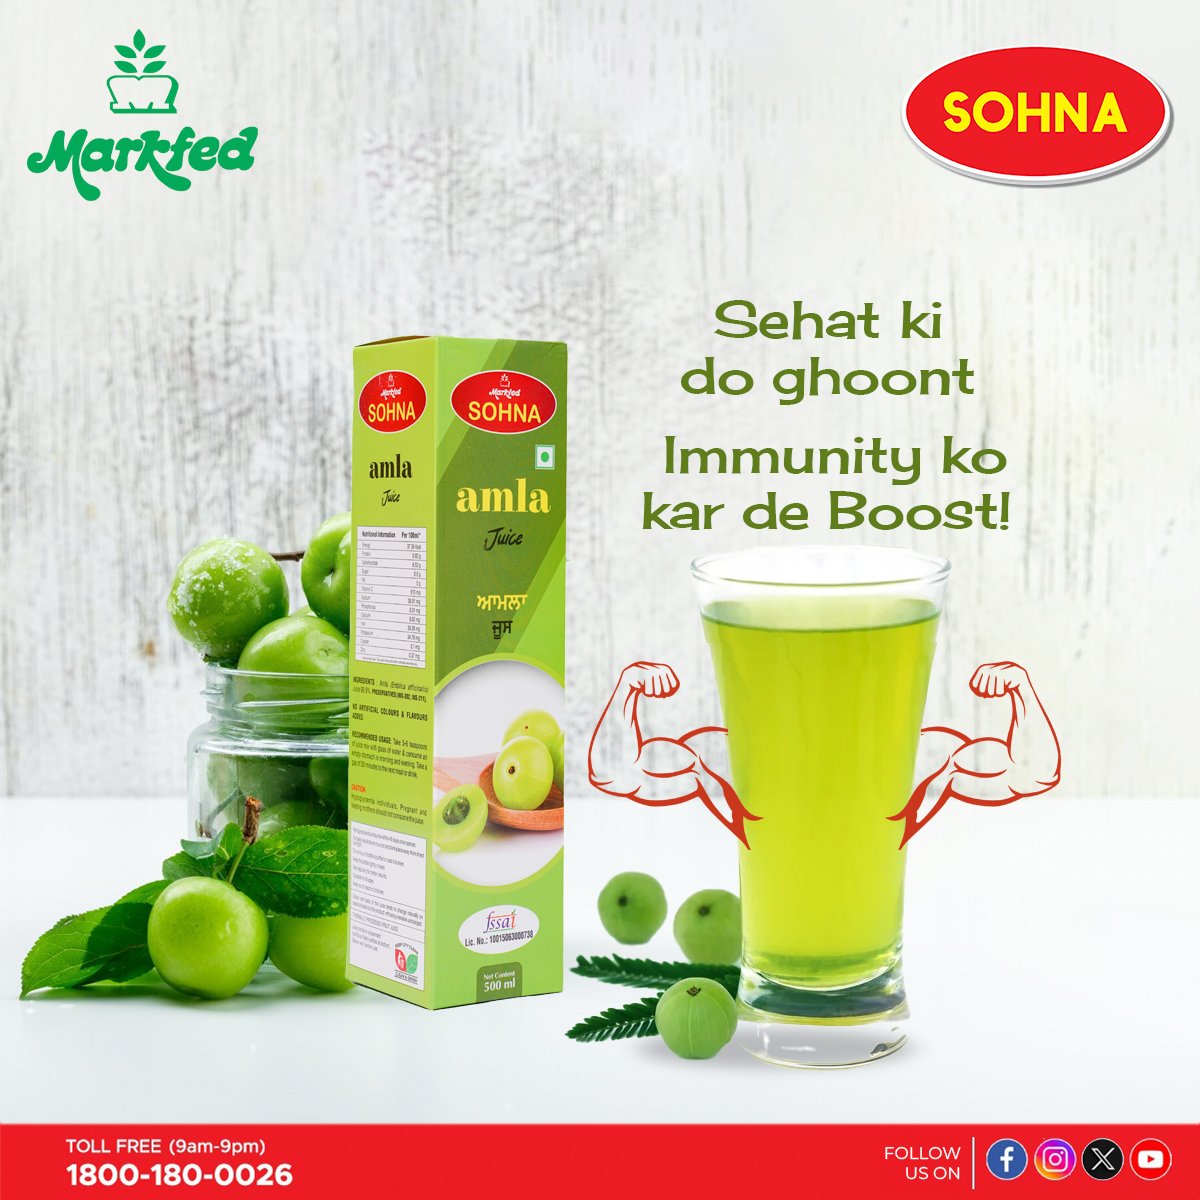 Nourish your well-being with every sip of SOHNA Amla Juice. 💪🏻 To purchase Markfed SOHNA Products, please check the link given: bit.ly/3IOvqoo #SOHNA #SOHNAMarkfed #Punjab #Amla #AmlaJuice #Immunity #healthyliving